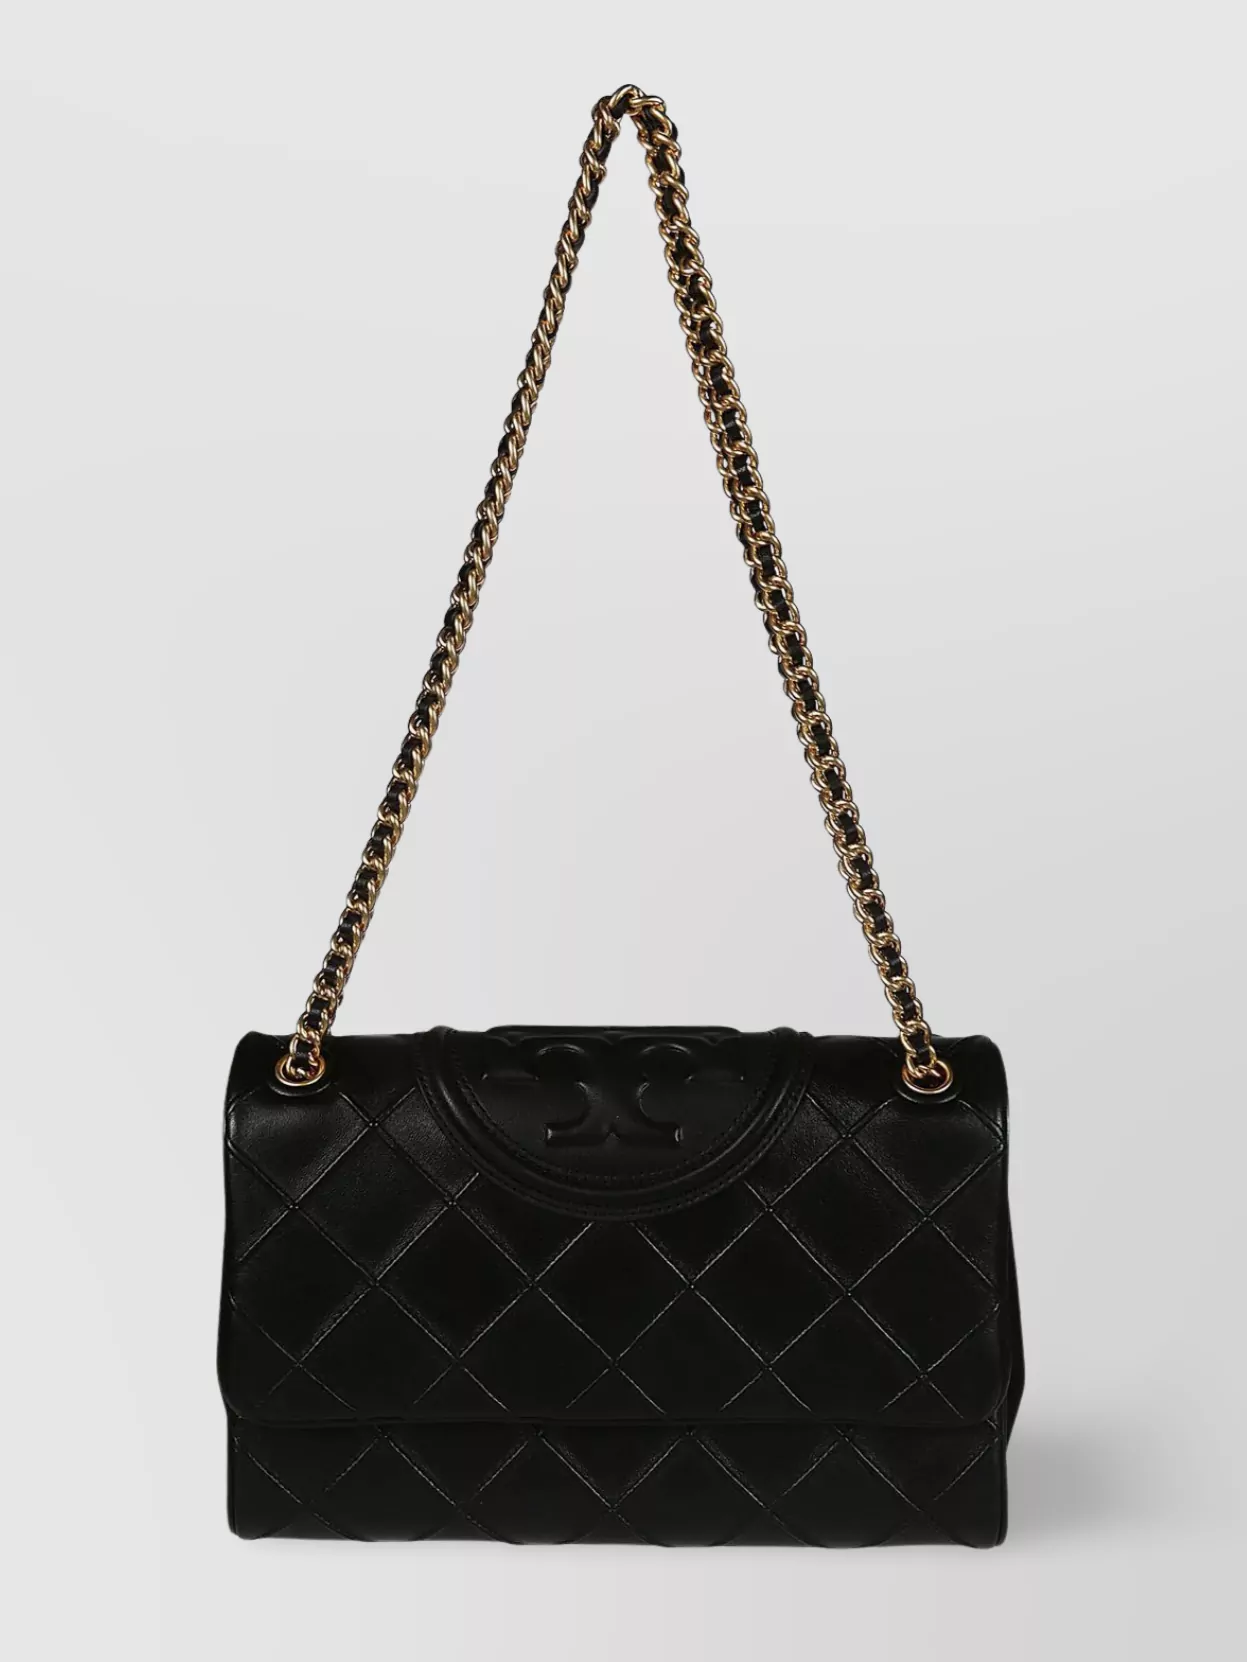 Tory Burch Soft Quilted Chain Shoulder Bag